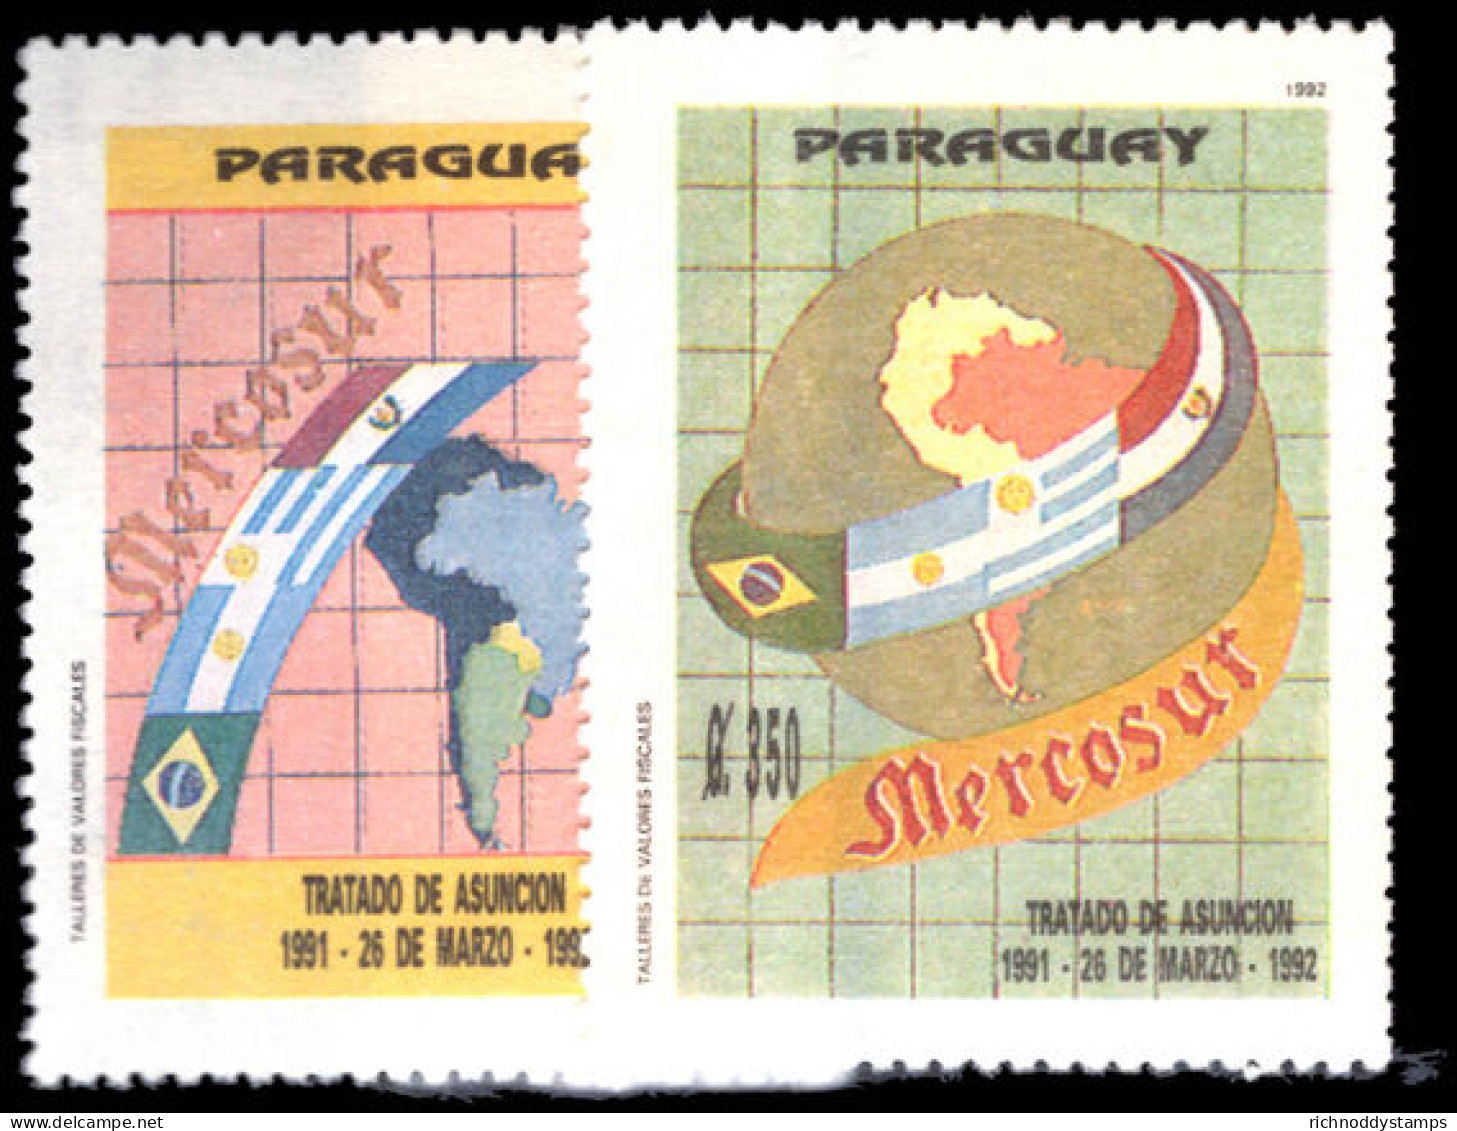 Paraguay 1993 First Anniversary (1992) Of Treaty Of Asuncion Forming Mercosur Unmounted Mint. - Paraguay